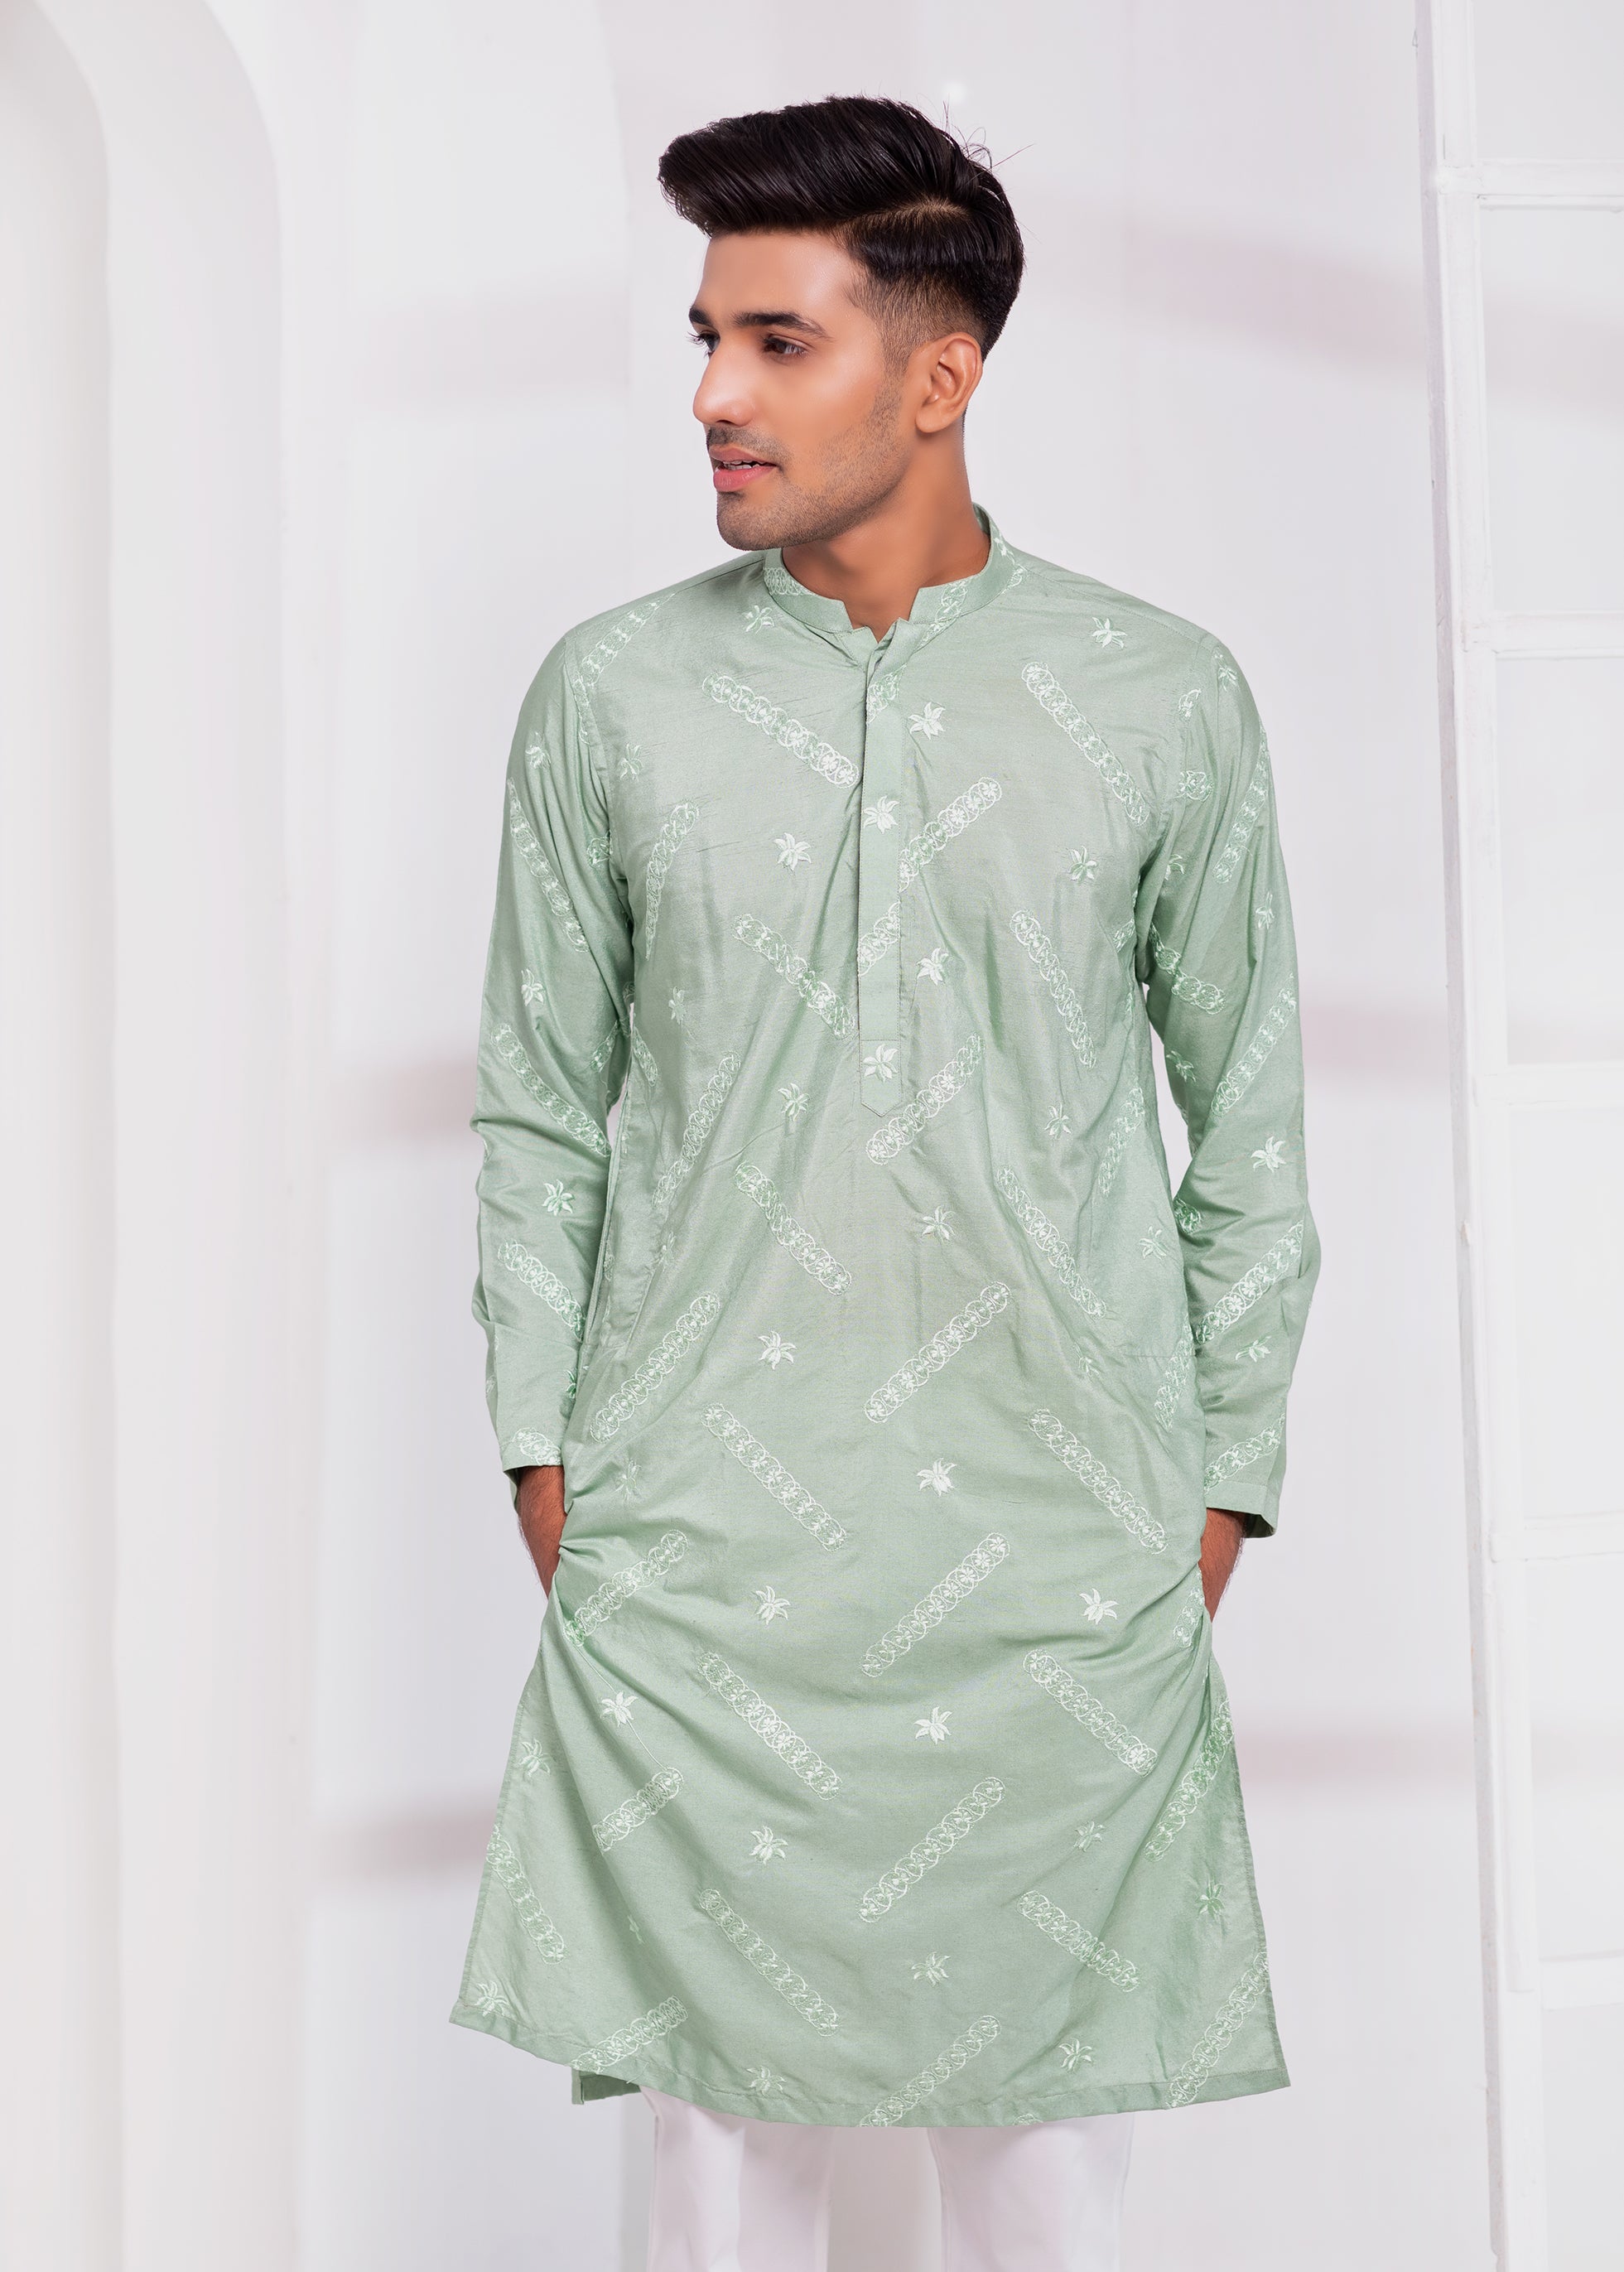 Mint-Green Color Embroidered Kurta Pajama For Men